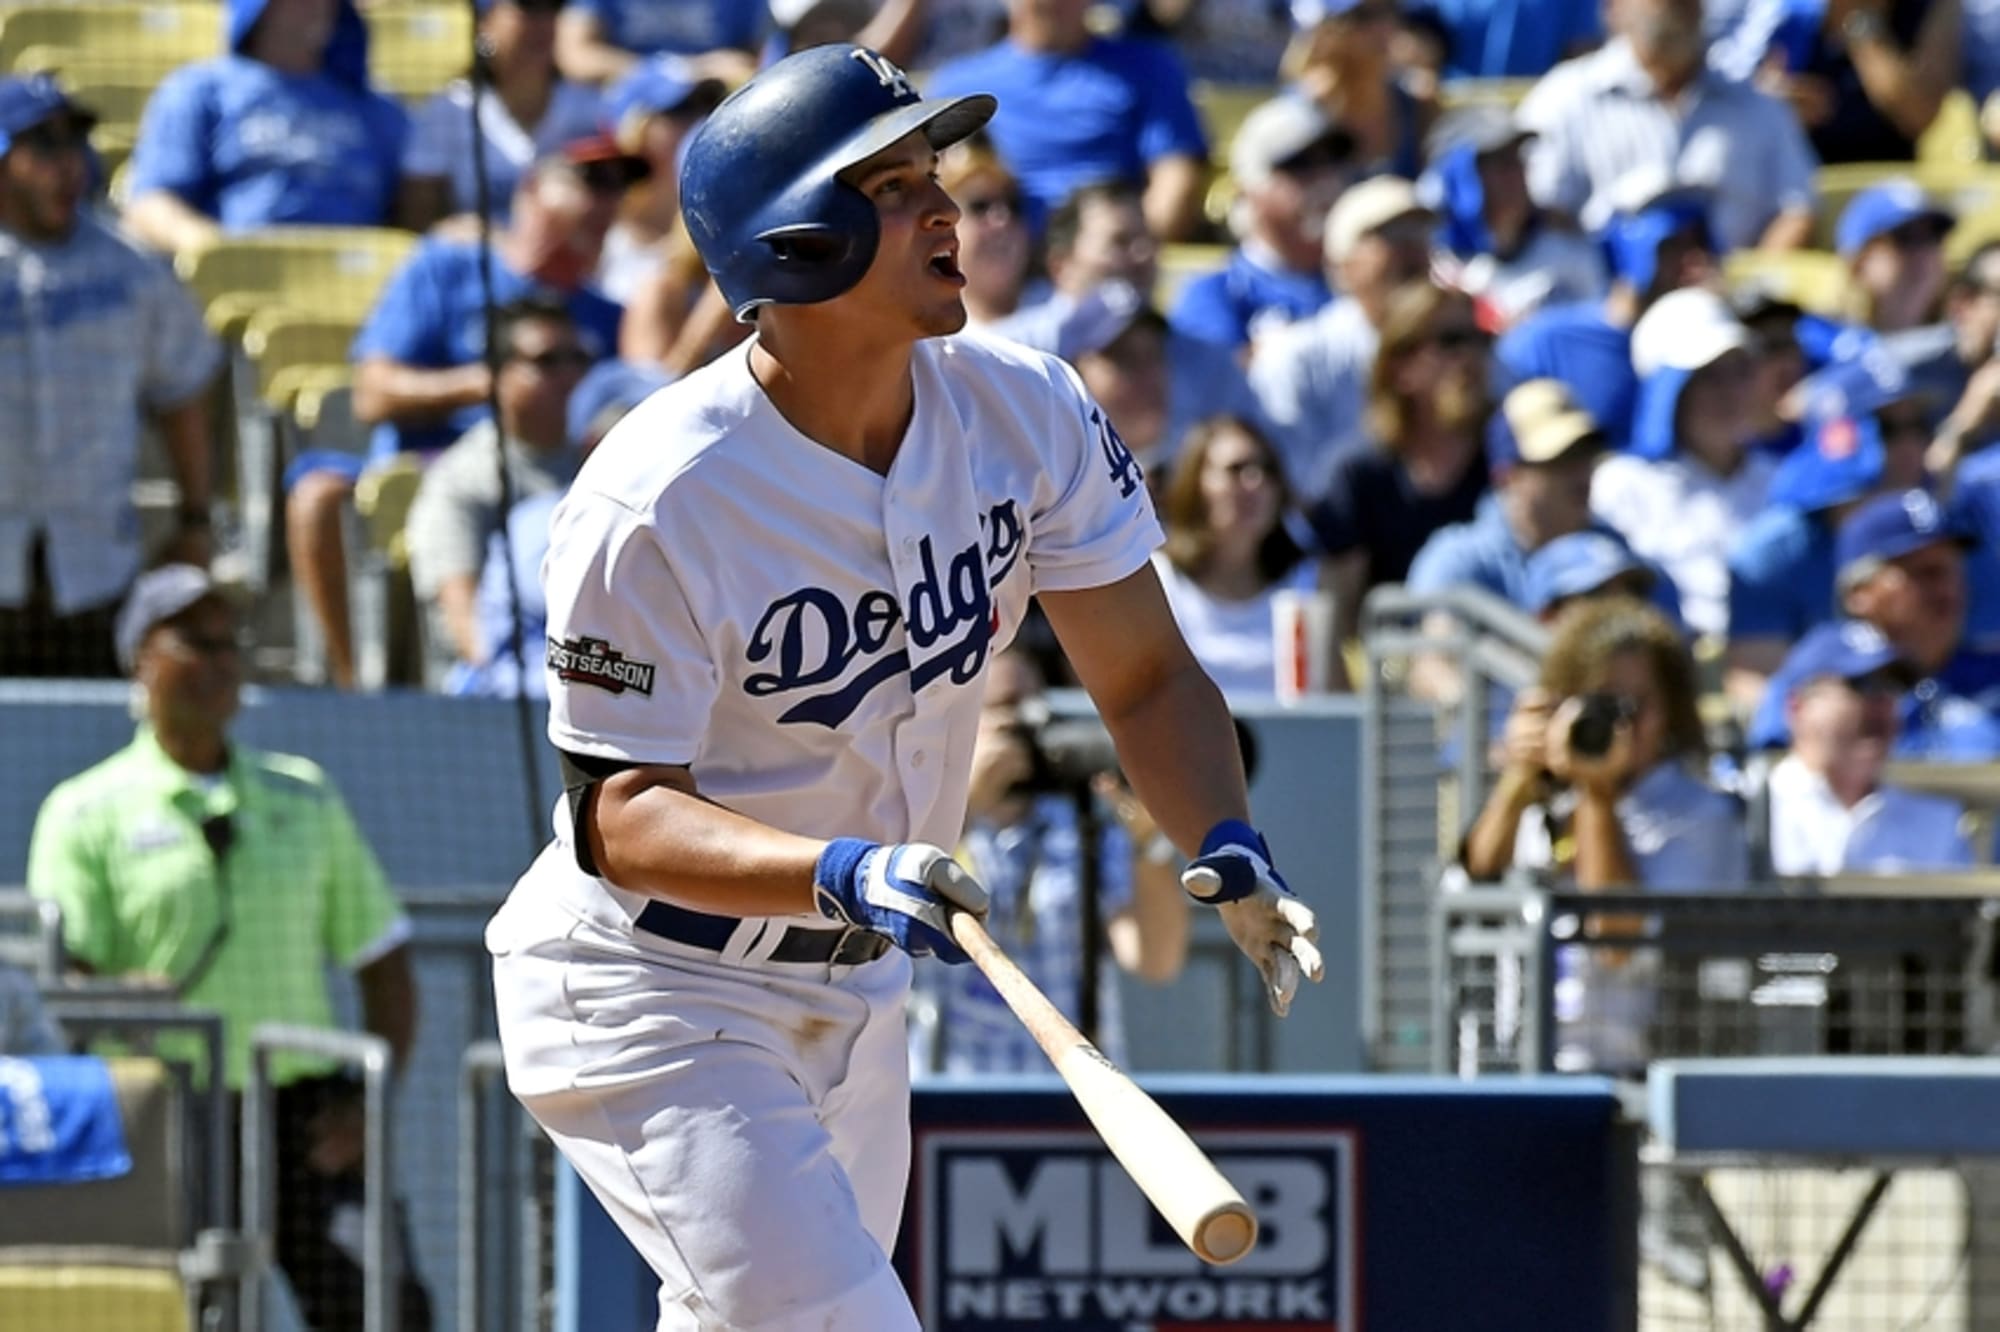 Los Angeles Dodgers 2016 Player of the Year: Corey Seager